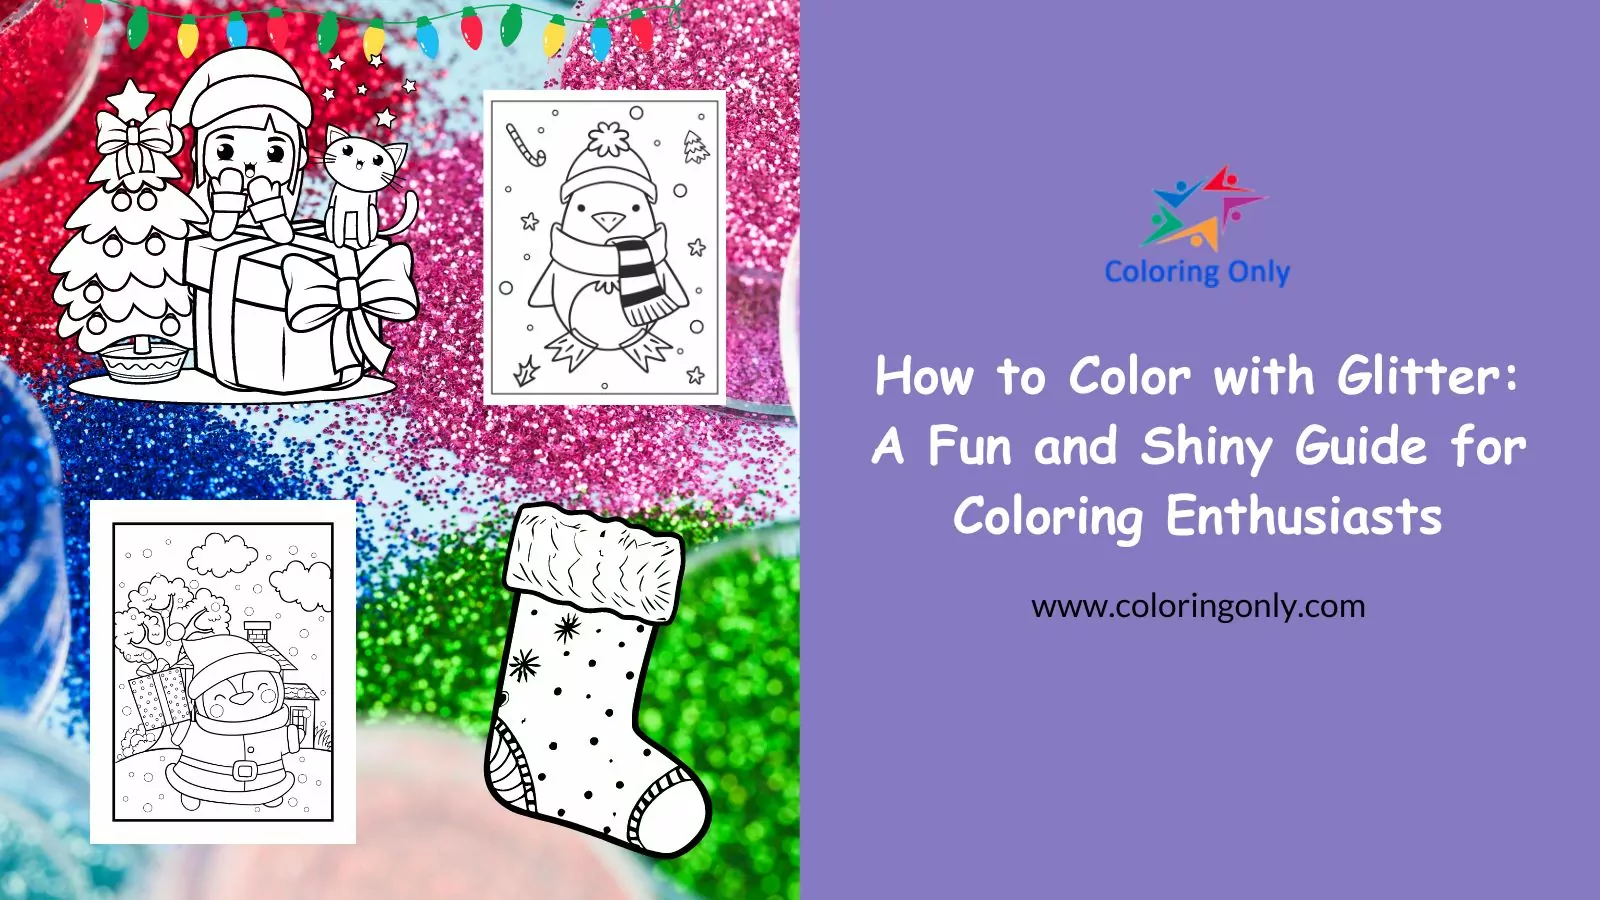 How to Color with Glitter: A Fun and Shiny Guide for Coloring Enthusiasts